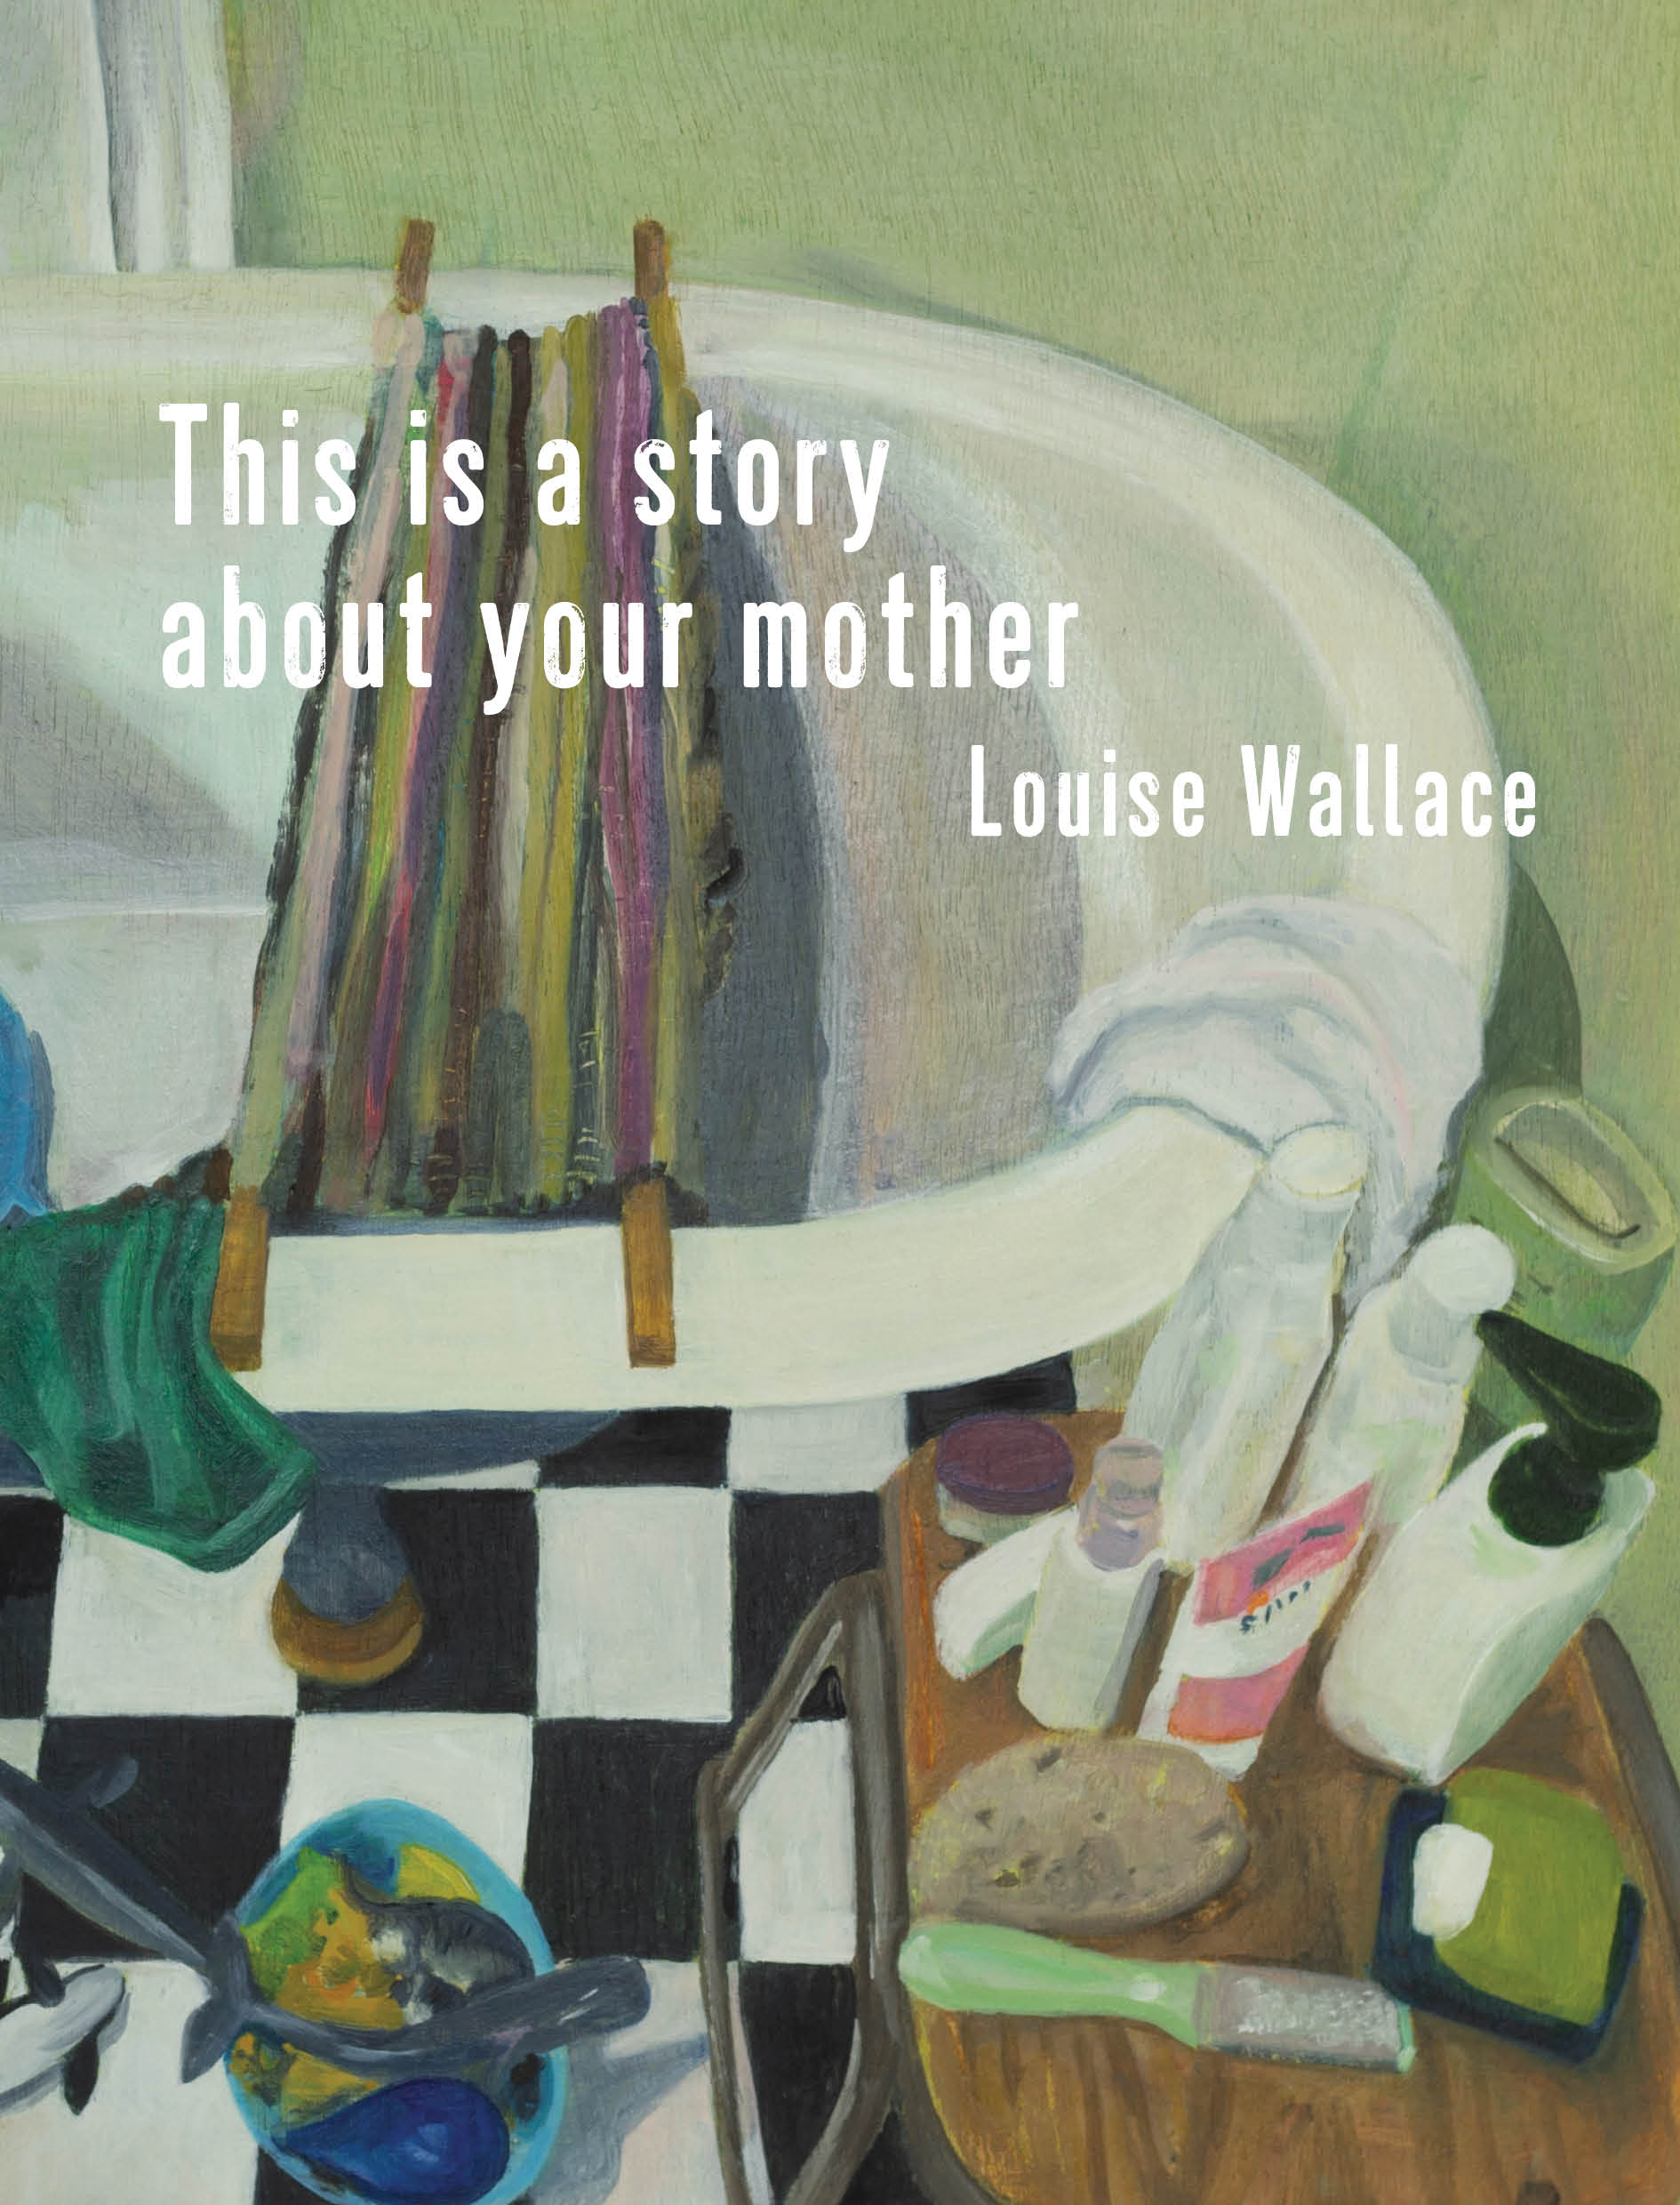 This is a story about your mother by Louise Wallace